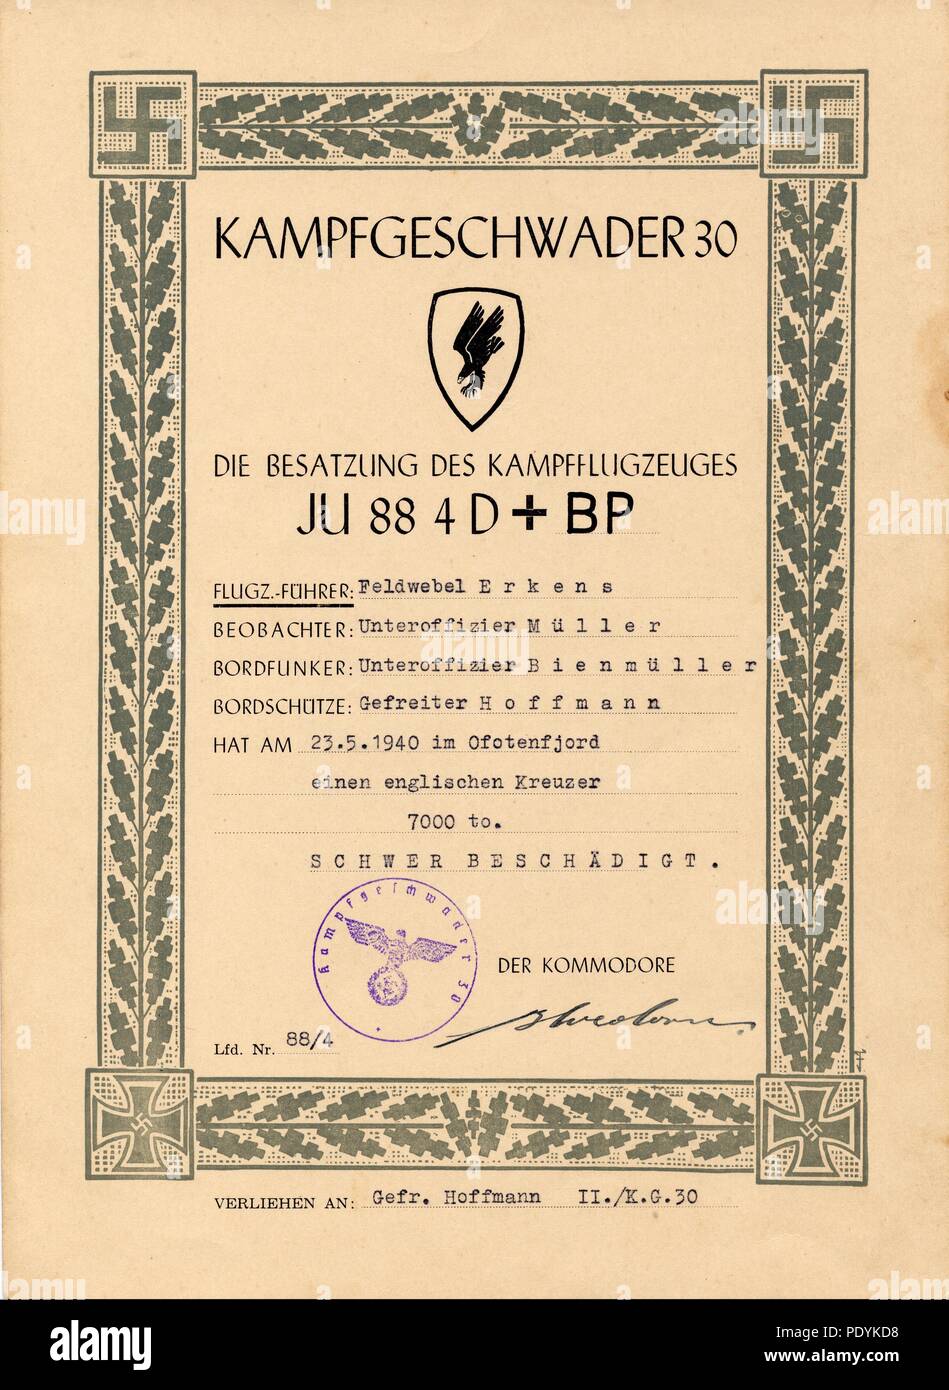 Certificate awarded to Feldwebel Willi Hoffmann of 5. Staffel, Kampfgeschwader 30: Awarded by KG 30 to Feldwebel Willi Erkens (Pilot), Unteroffizier Richard Müller (Observer), Unteroffizier Otto Bienmüller (Radio Operator) and Gefreiter Willi Hoffmann (Air Gunner) of 5./KG 30 for severely damaging an English cruiser in Ofotfjord on 20th May 1940, while crewing Junkers Ju 88 4D+BP. The document is signed in ink by Major Erich Bloedorn, Kommodore of Kampfgeschwader 30. Stock Photo